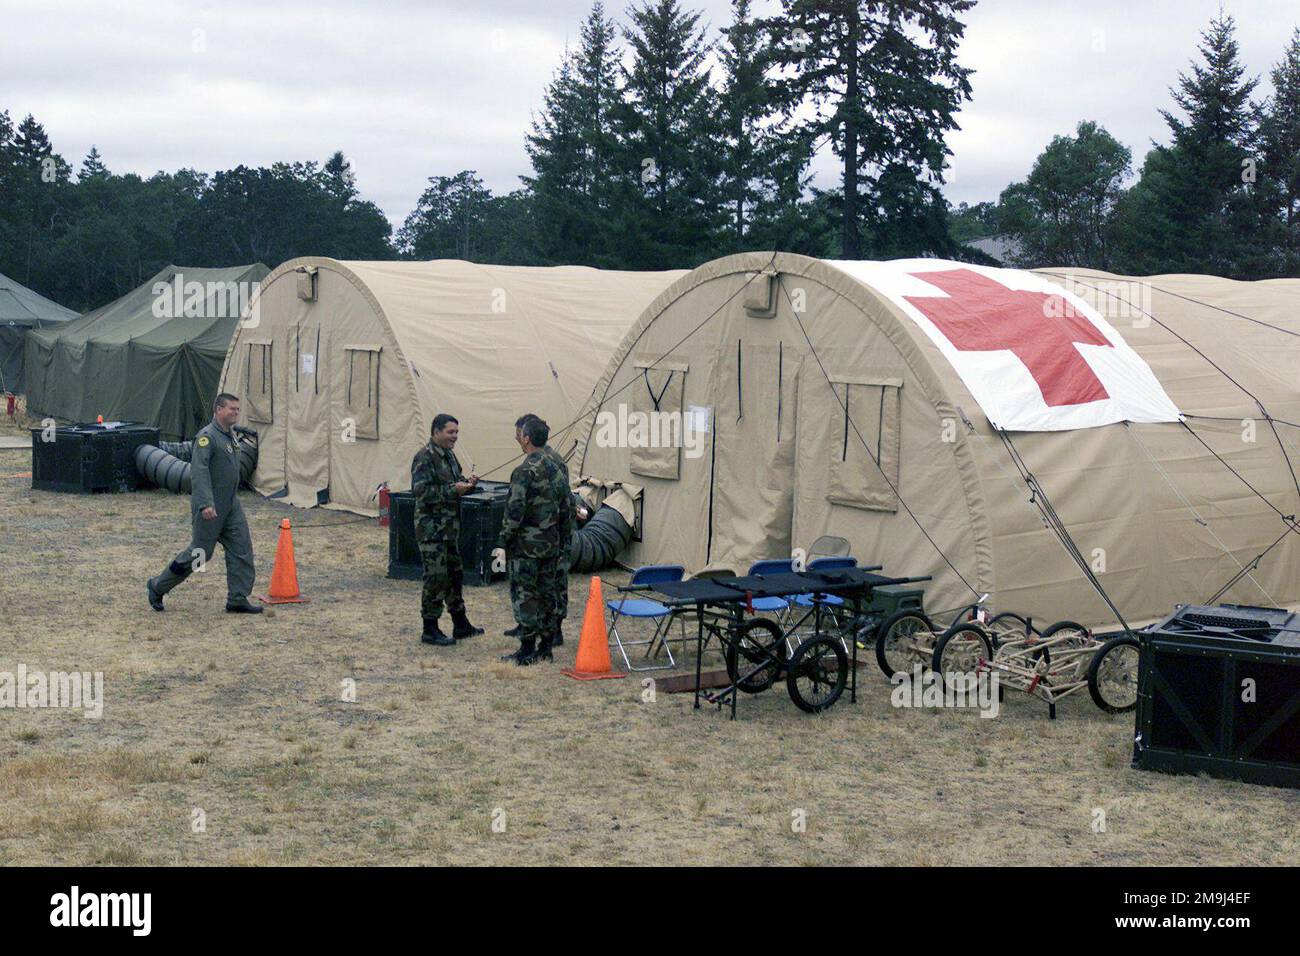 020717-F-5735S-001. [Complete] Scene Caption: US Air Force Reserve (USAFR) Medical personnel await the arrival of patients at the Expeditionary Medical System (EMEDS) Hospital during a medical exercise held at Fort Lewis, Washington (WA), during Exercise SEAHAWK 2002. Seahawk combines active duty and reserve components from the US Air Force (USAF), US Navy (USN), US Coast Guard (USCG), US Public Health Service, Royal Canadian Armed Forces (RCAF), Federal Bureau of Investigation (FBI), Federal Emergence Management Association (FEMA) and multiple civilian first responder agencies in coordinated Stock Photo